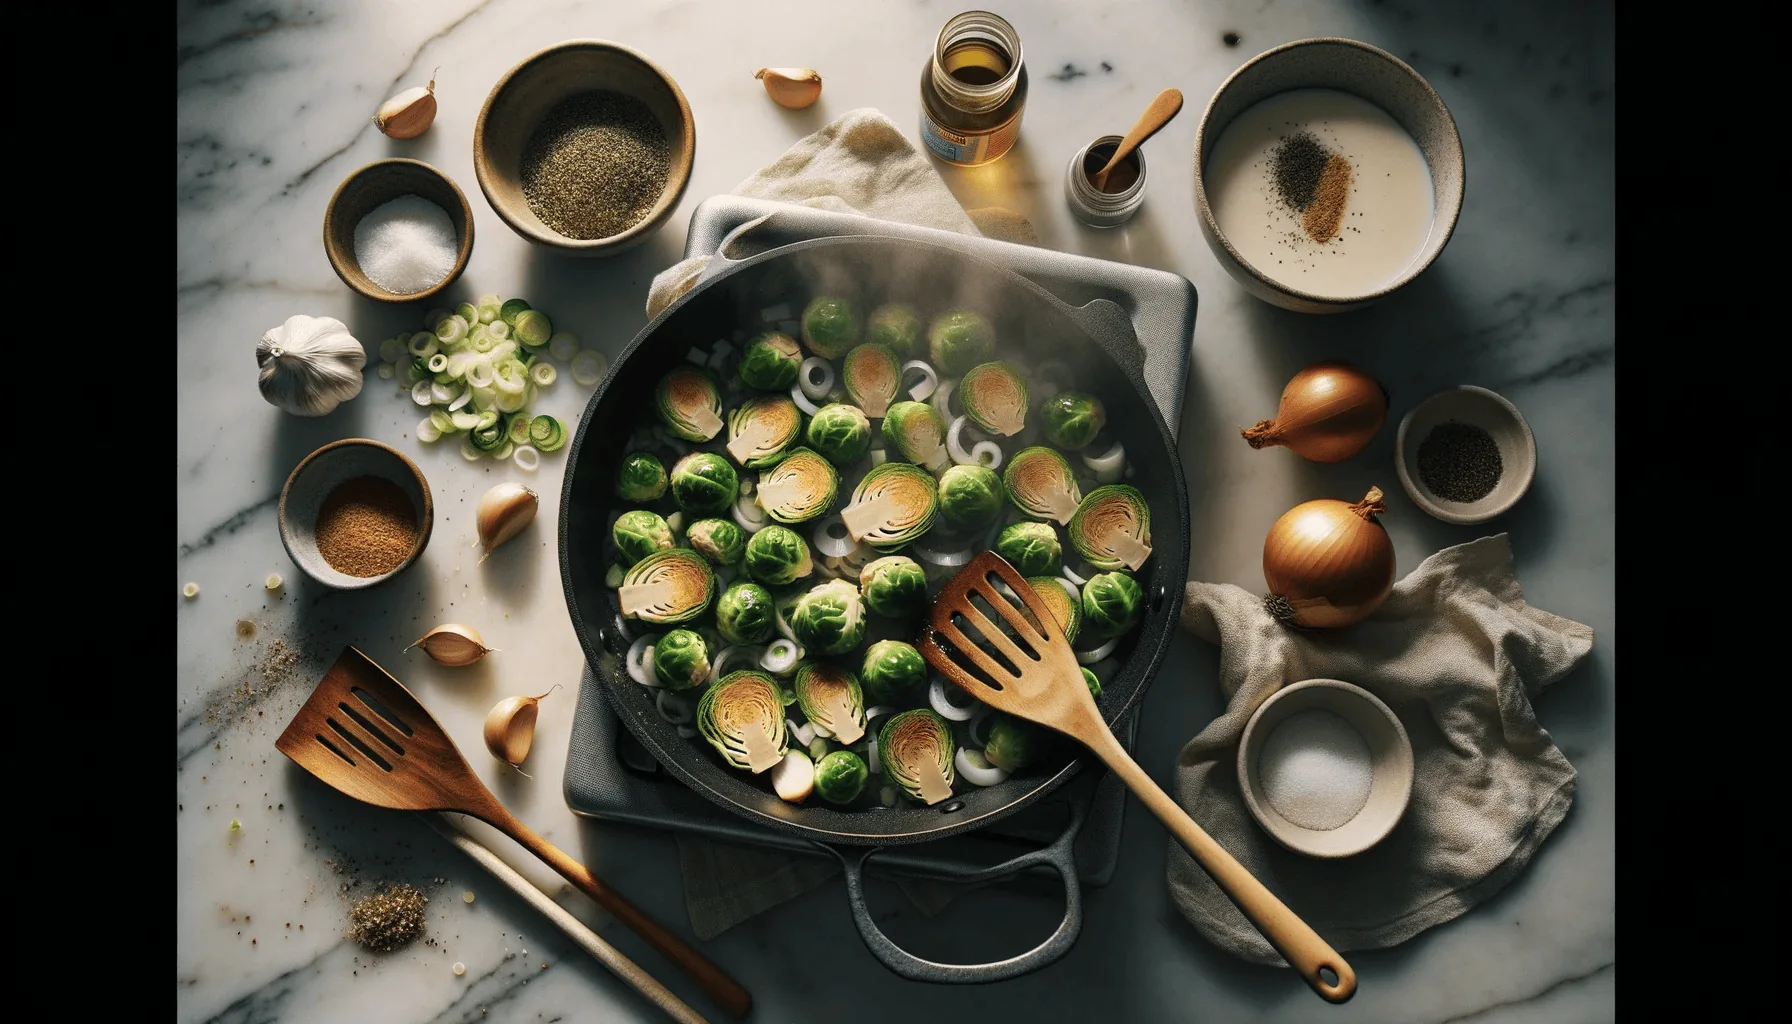 The making of vegan Brussels sprouts casserole recipe